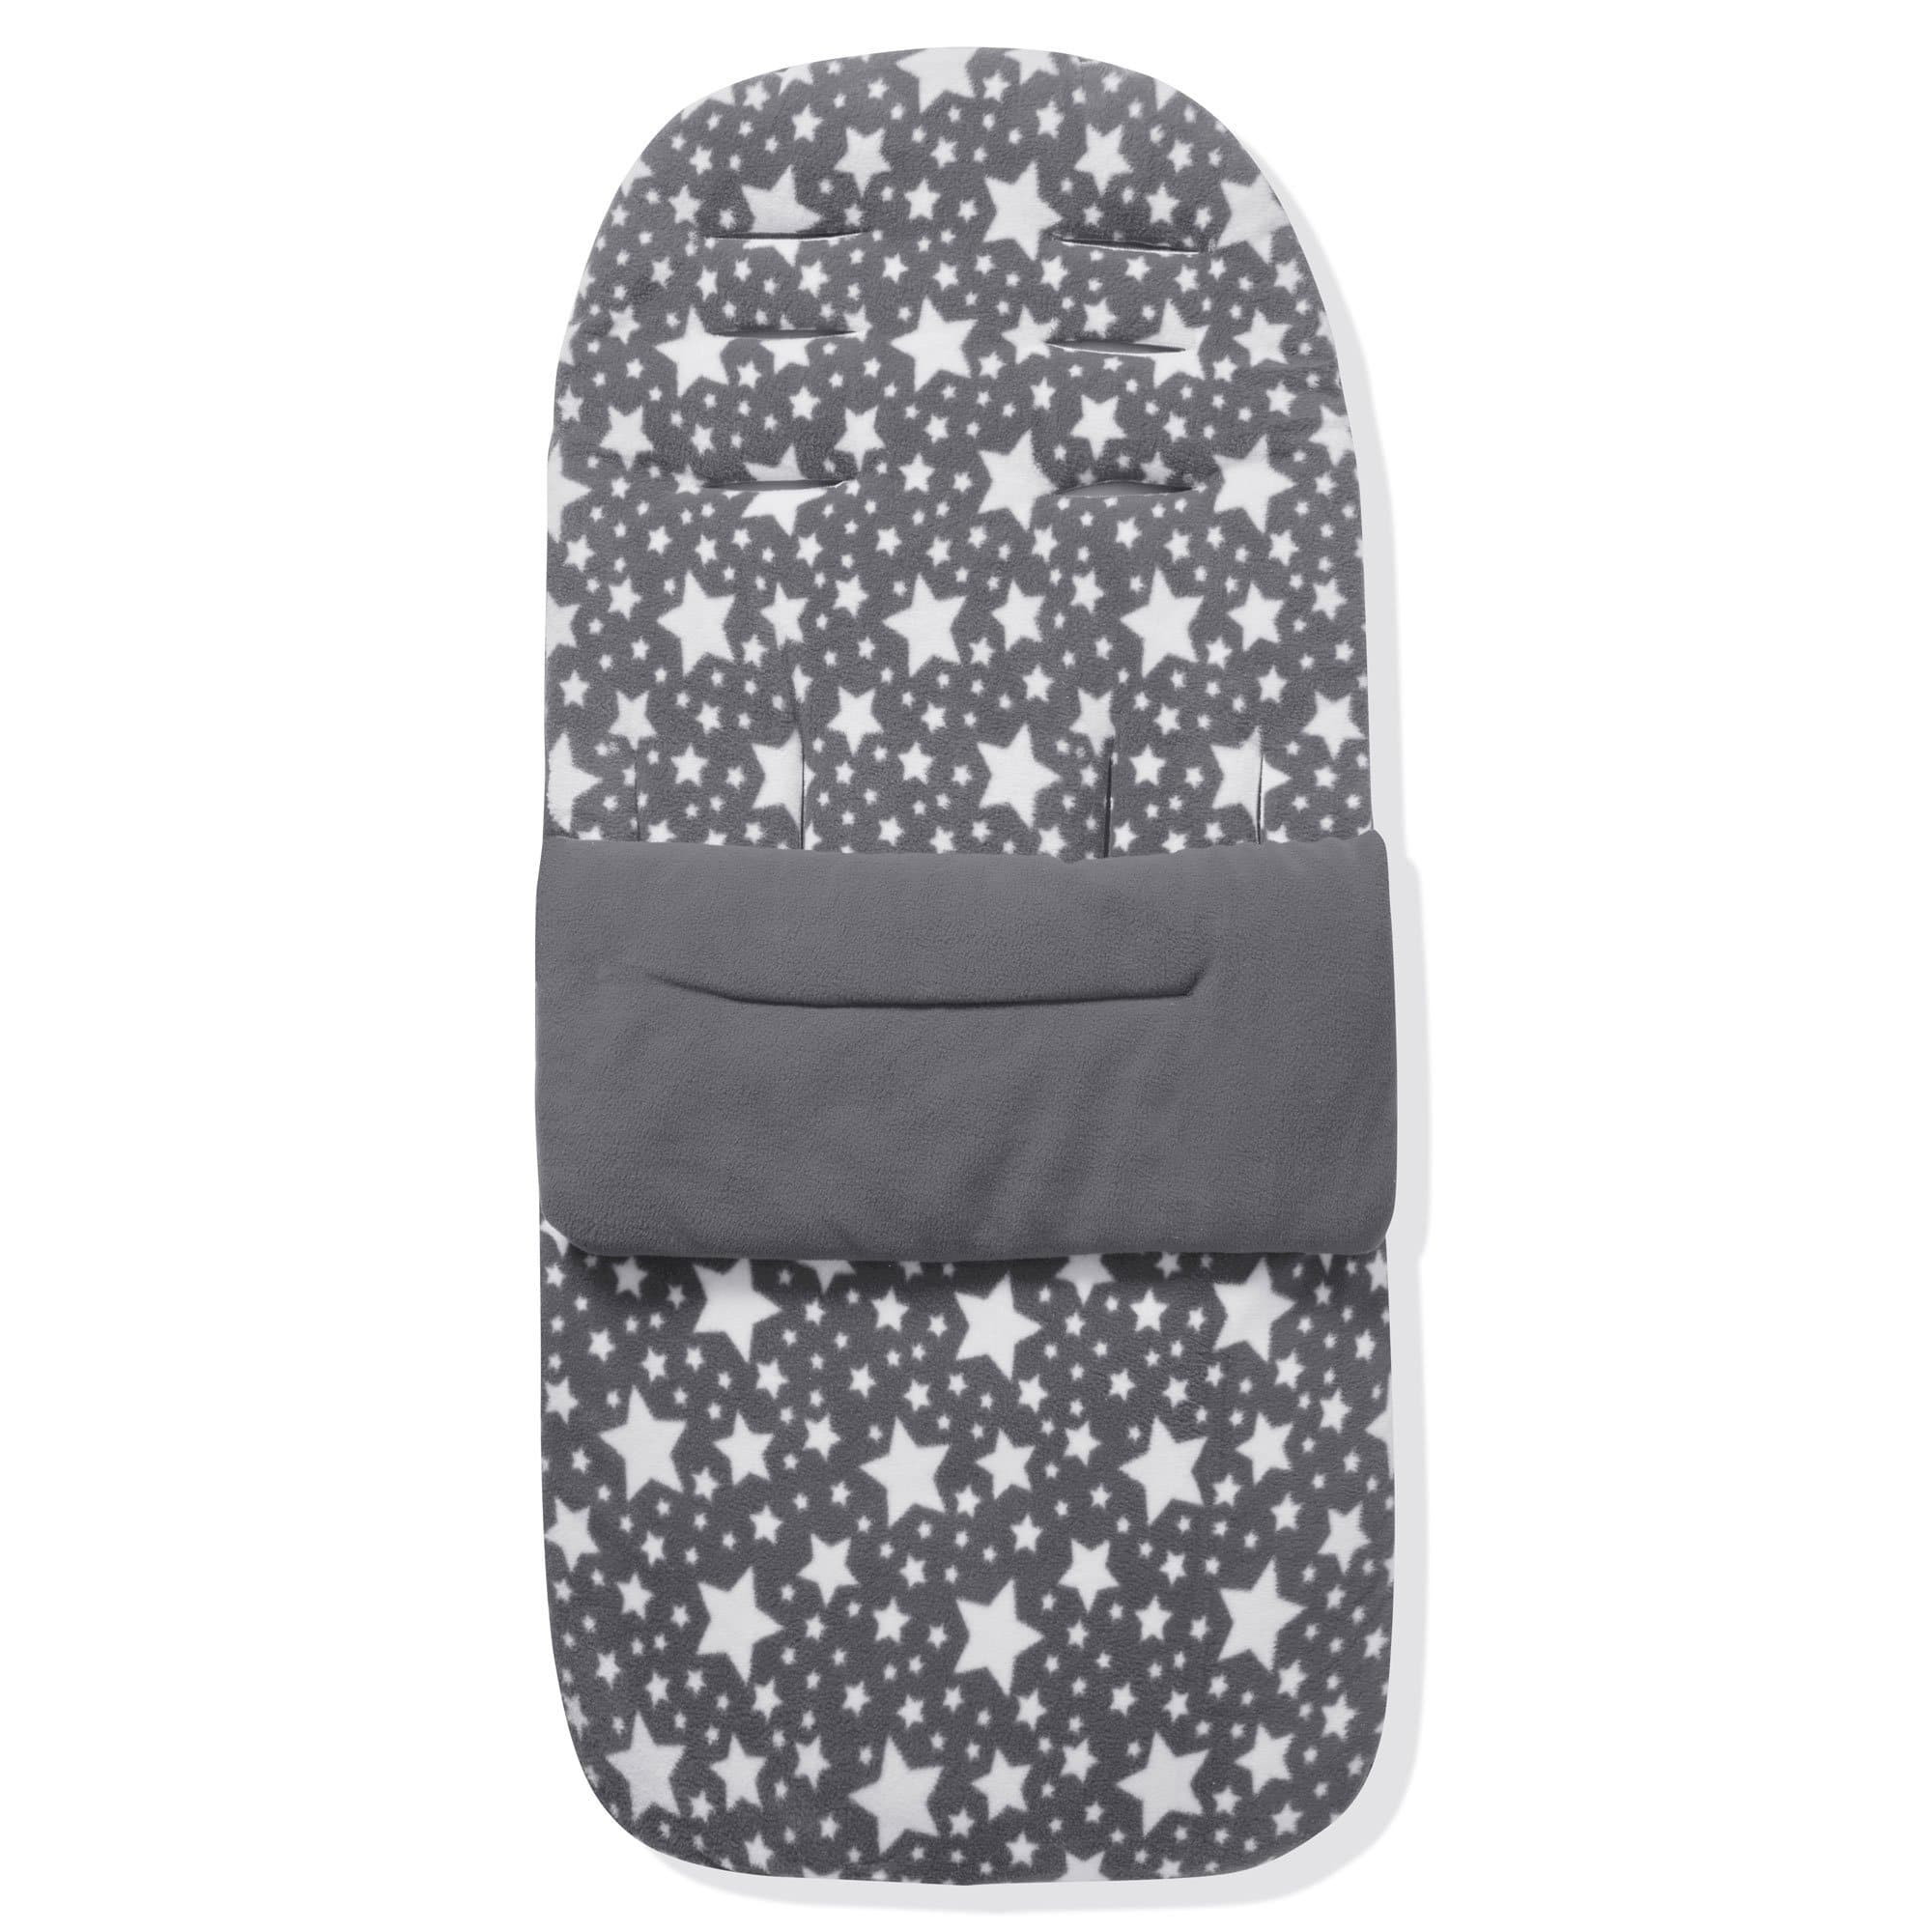 Fleece Footmuff / Cosy Toes Compatible with Cybex - Grey Star / Fits All Models | For Your Little One